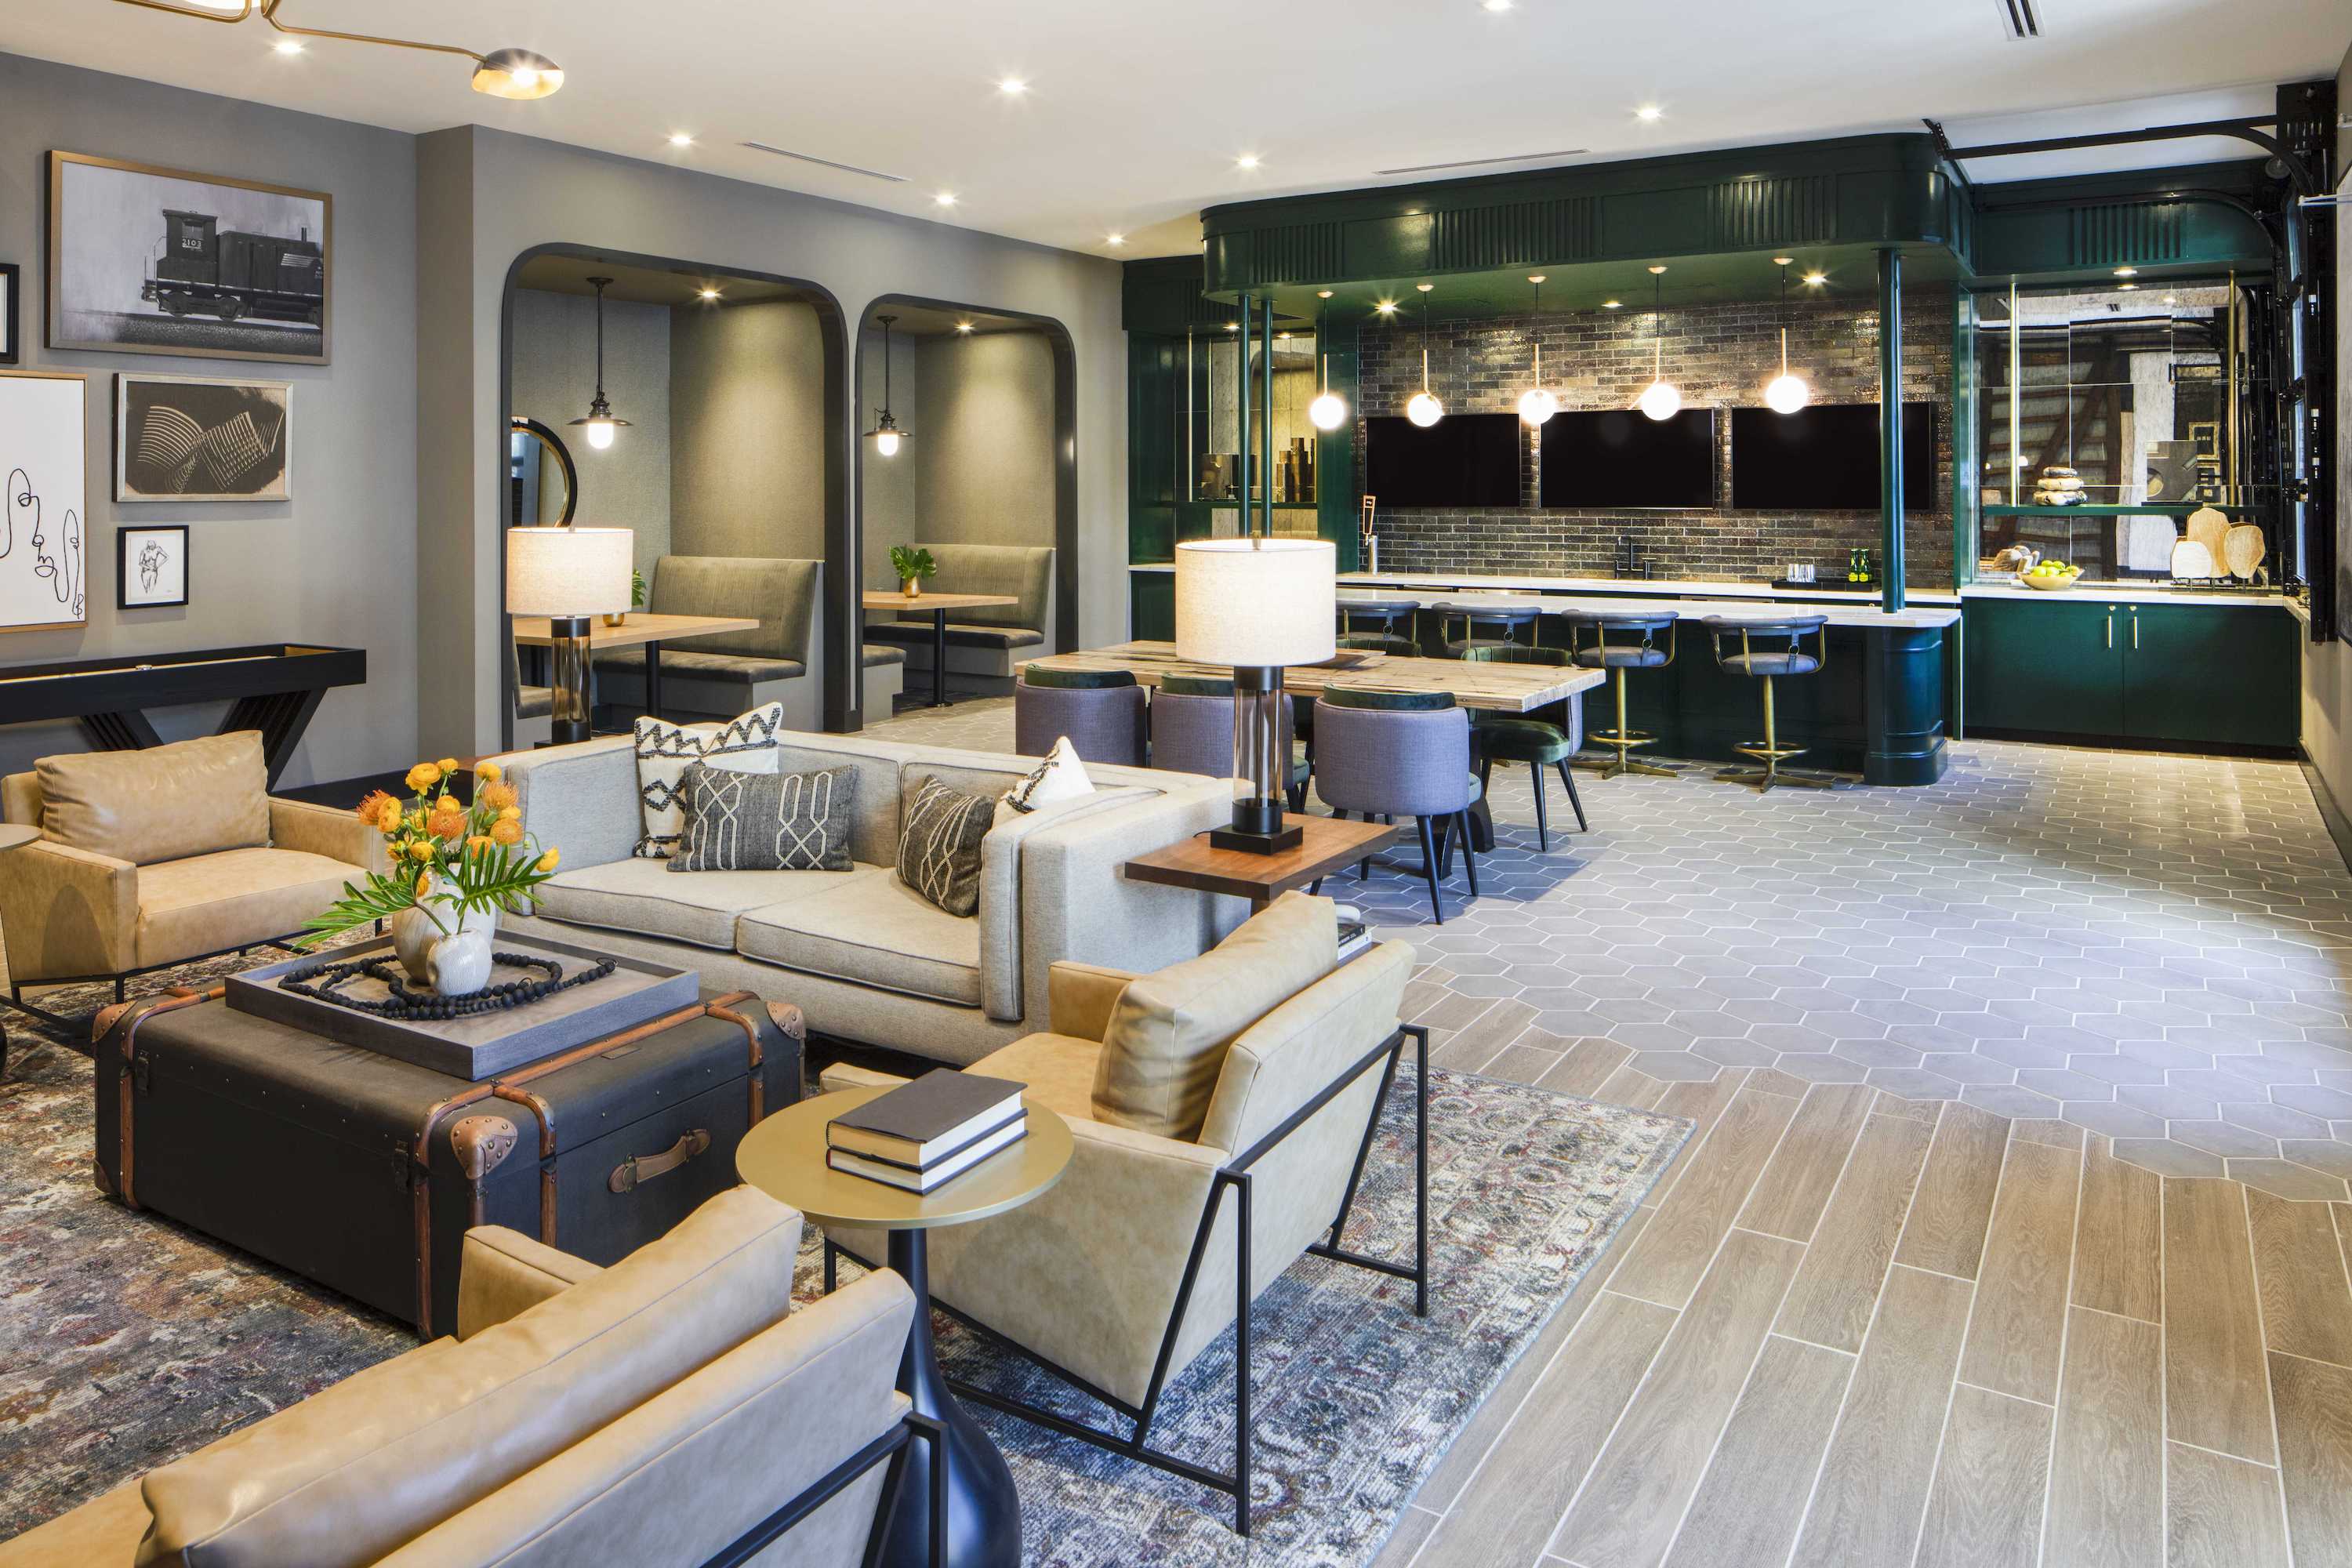 Deep greens bring an air of sophistication to this relaxed social lounge.